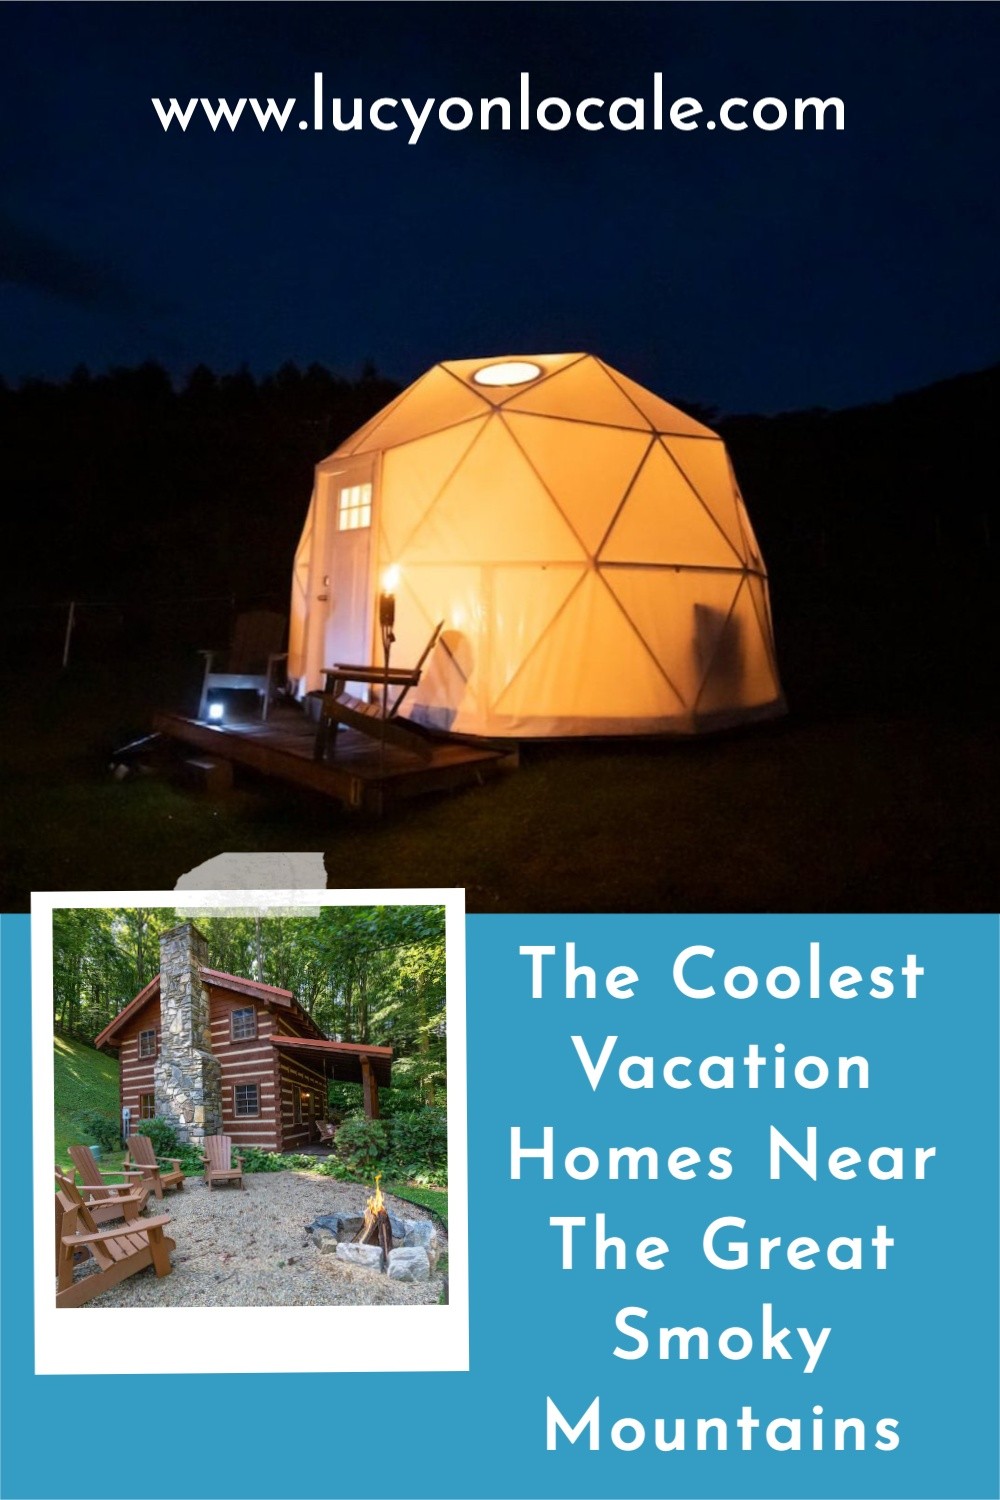 Vacation Home Rentals in the Great Smoky Mountains